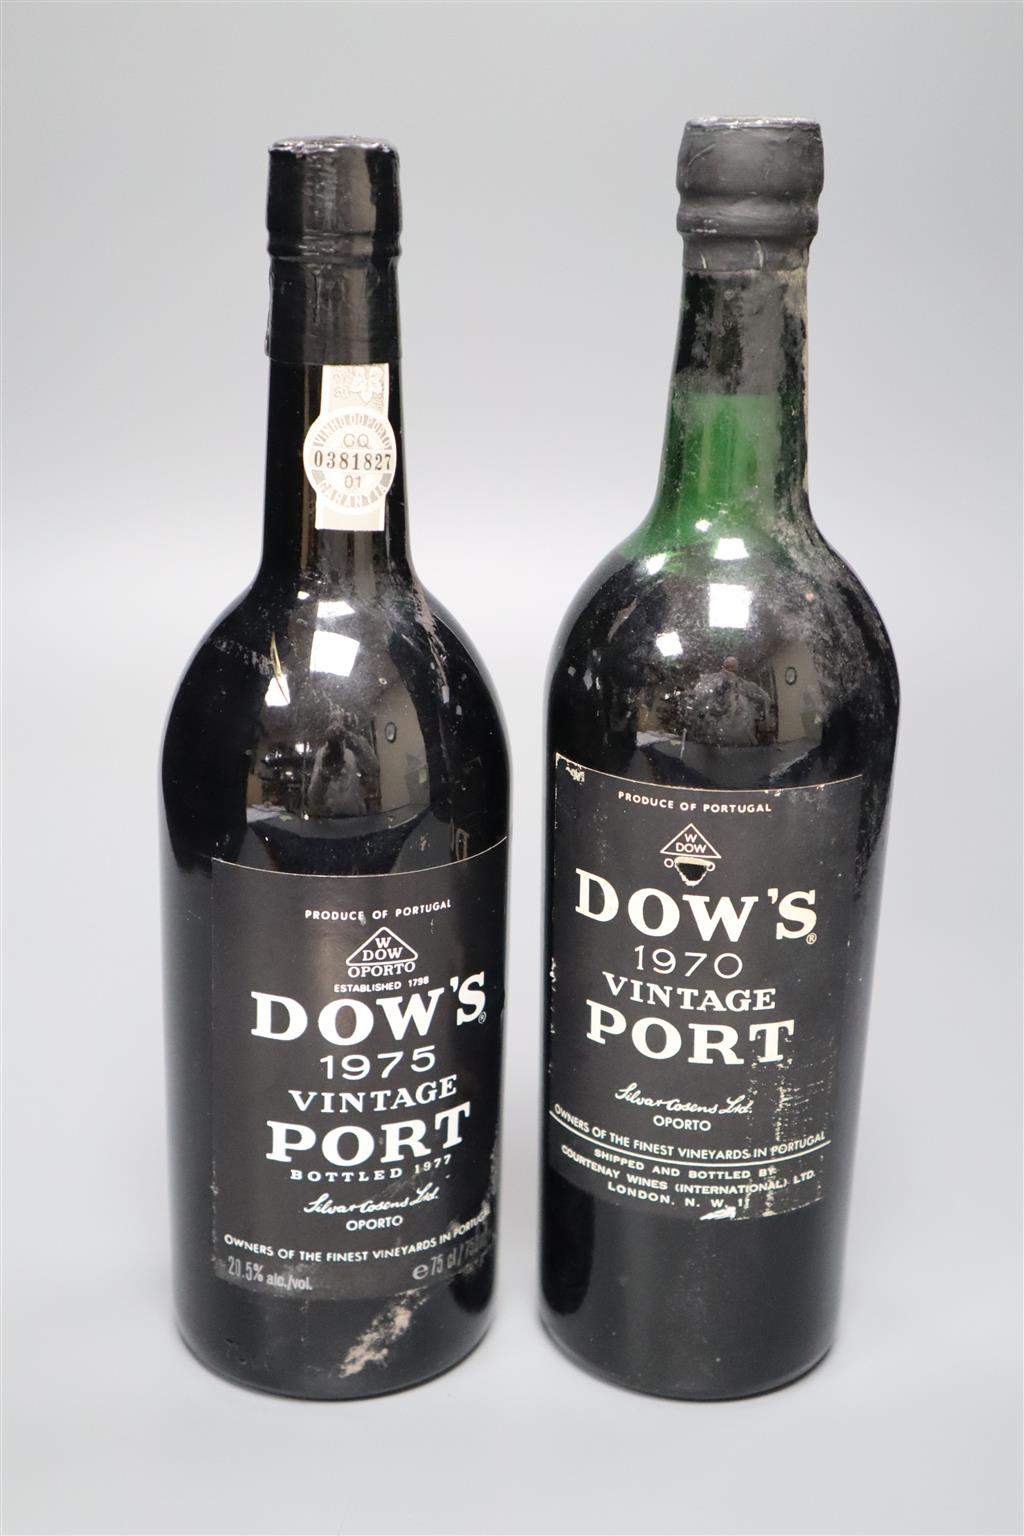 Two bottles of Dows vintage port; 1970 and 1975